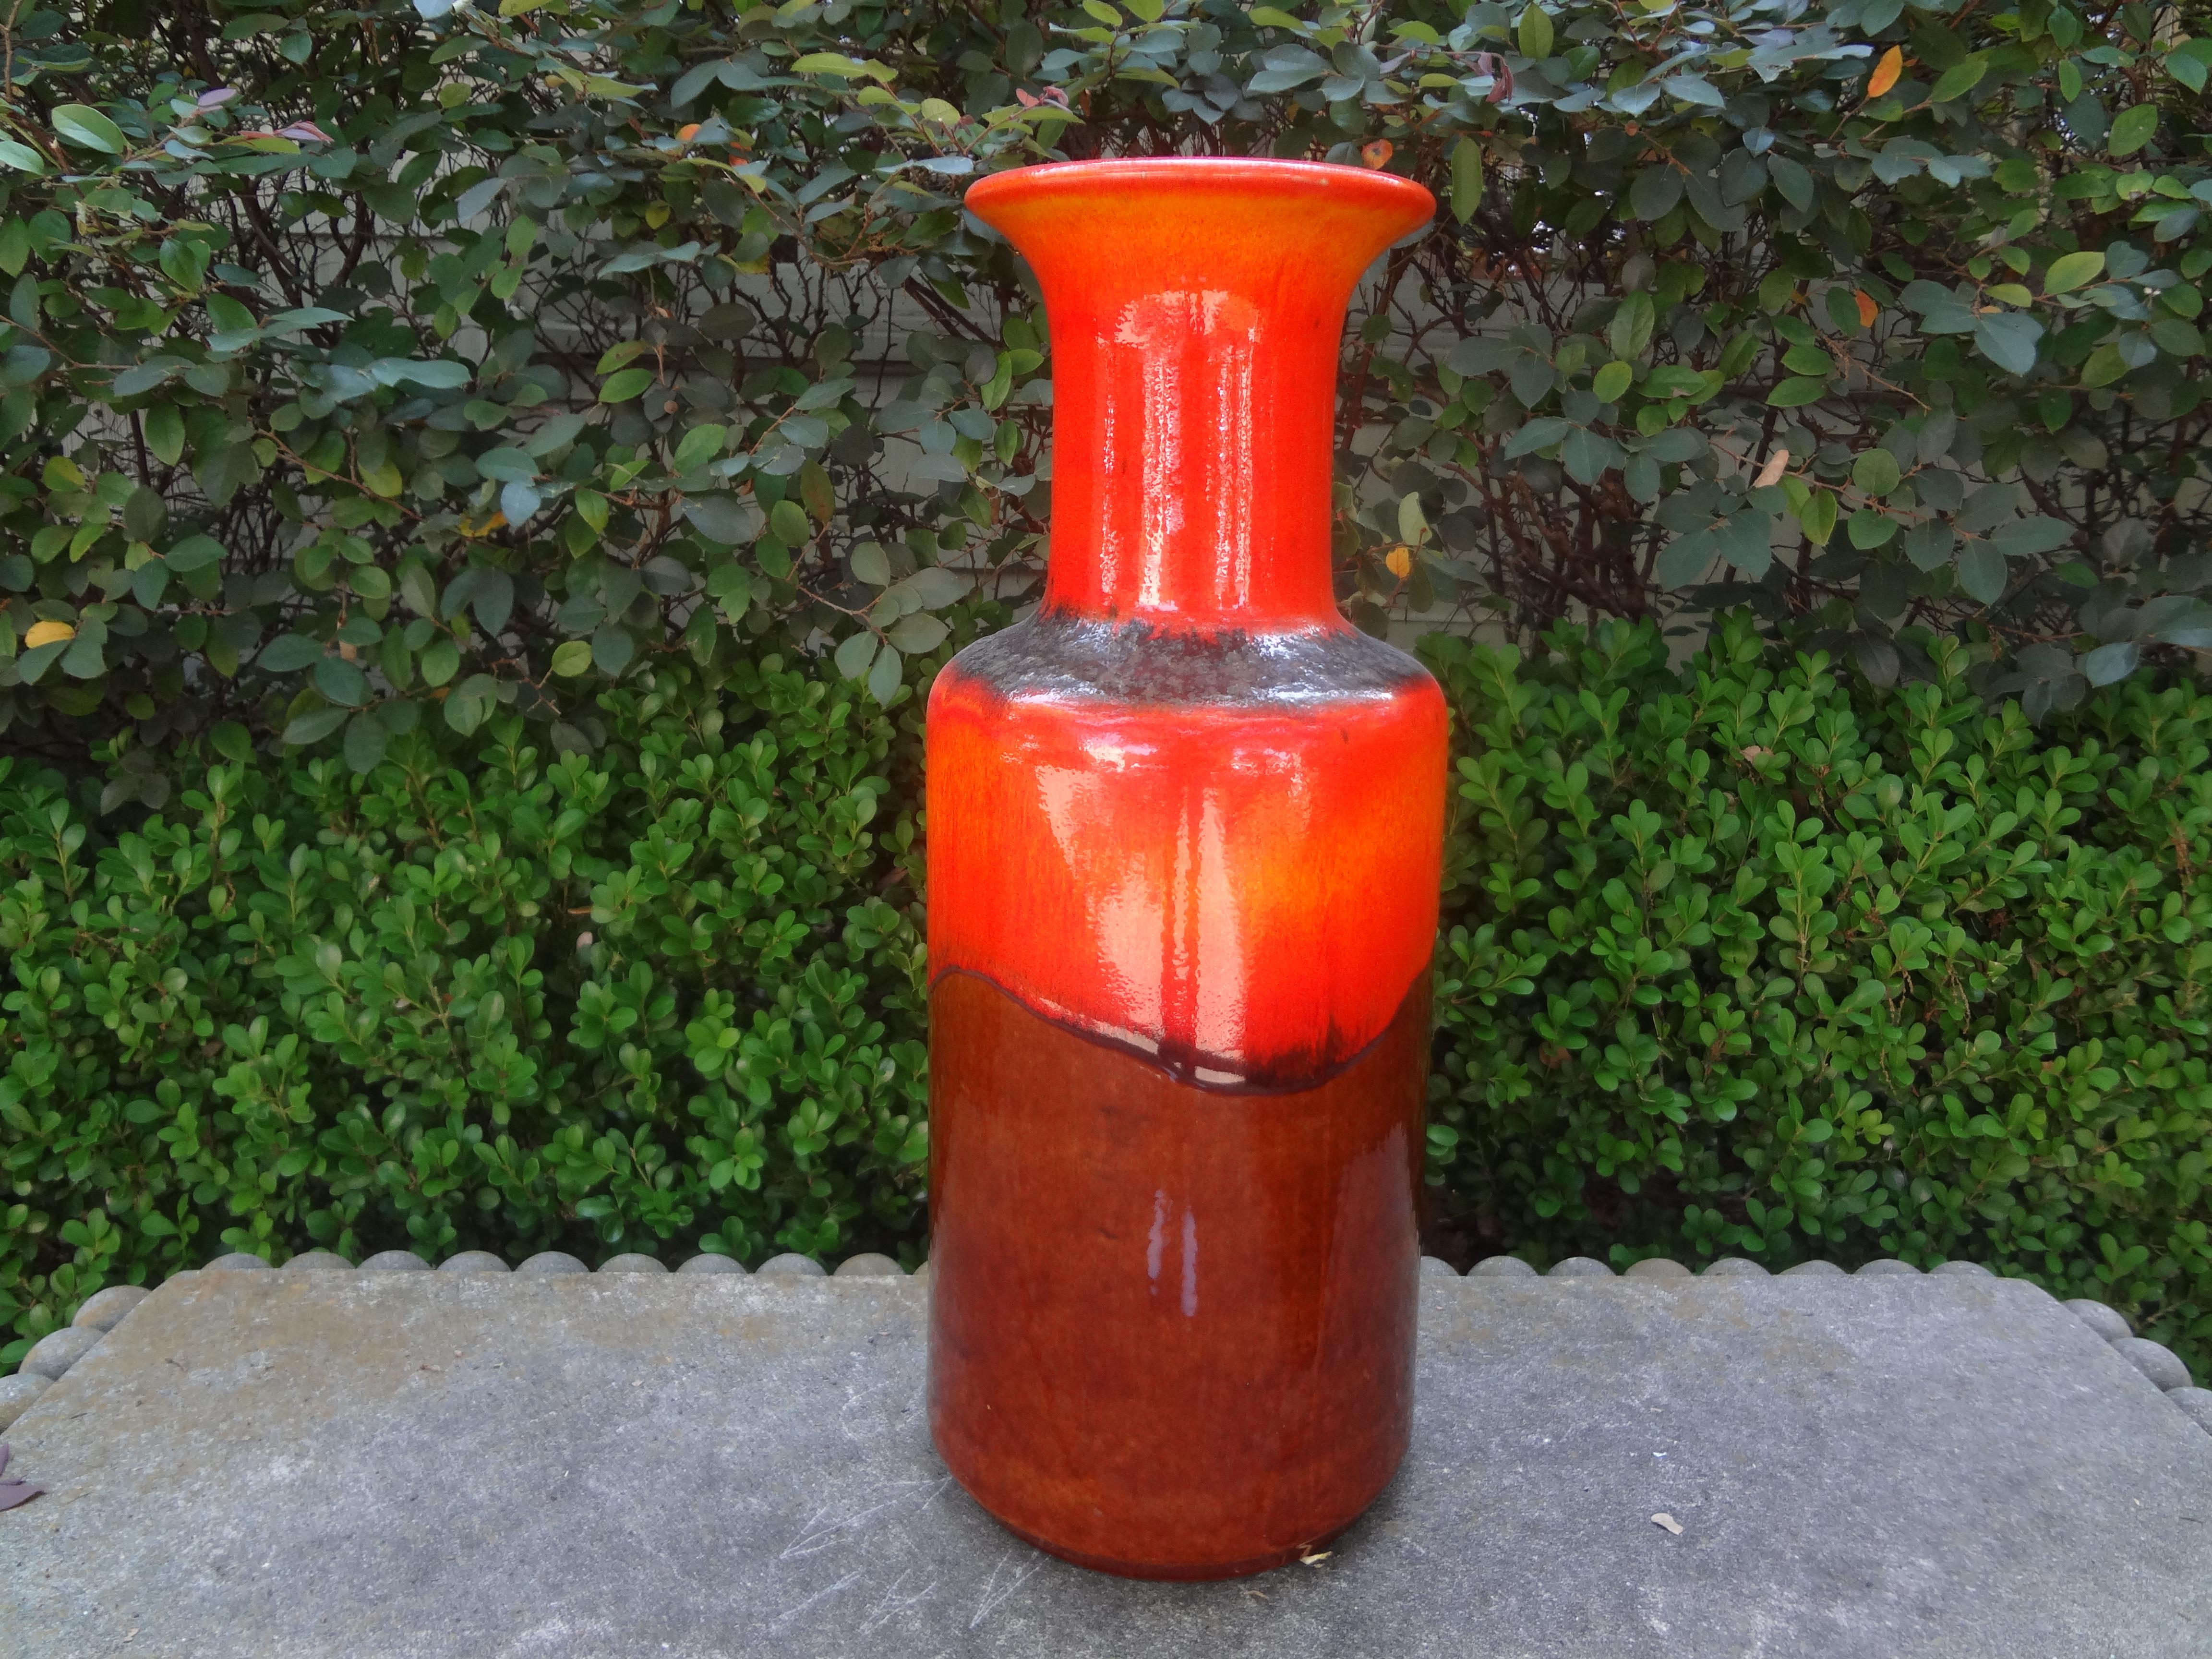 20th century West German Glazed Pottery Vase.
This handsome tall mid-20th century West German glazed pottery vase is executed in orange and brown tones.
Just one of our large collection on 1stdibs!
 